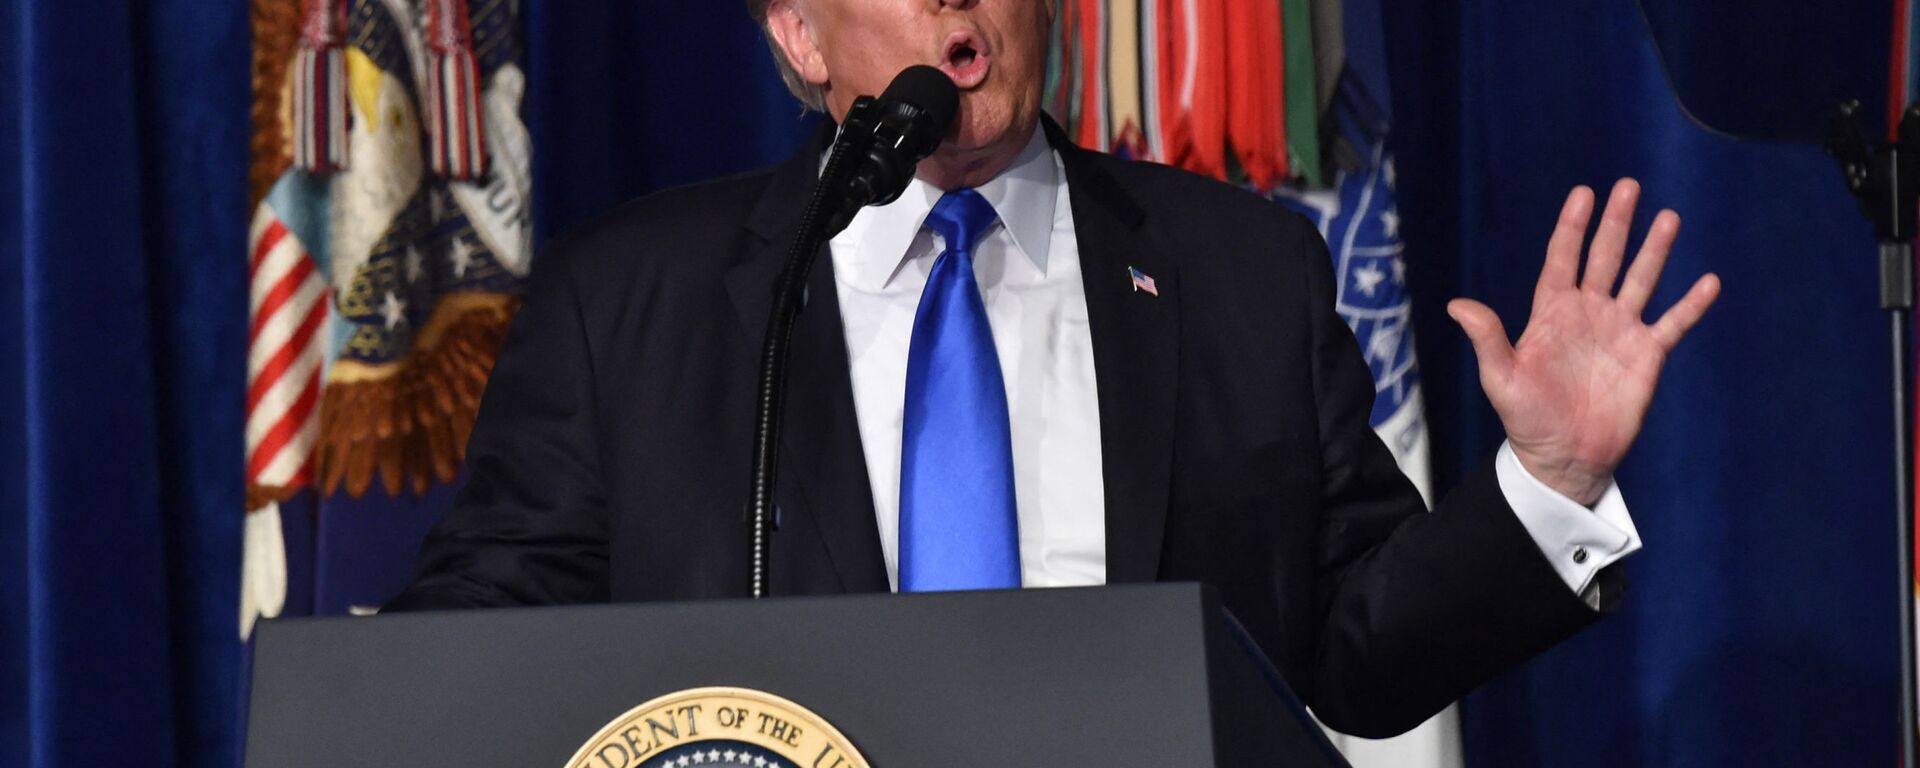 US President Donald Trump speaks during his address to the nation from Joint Base Myer-Henderson Hall in Arlington, Virginia, on August 21, 2017. - Trump Monday left the door open to a possible political agreement with the Taliban, in an address to the nation on America's strategy in the 16-year Afghan conflict. Some day, after an effective military effort, perhaps it will be possible to have a political sentiment that includes elements of the Taliban in Afghanistan, he said. - Sputnik International, 1920, 09.10.2021